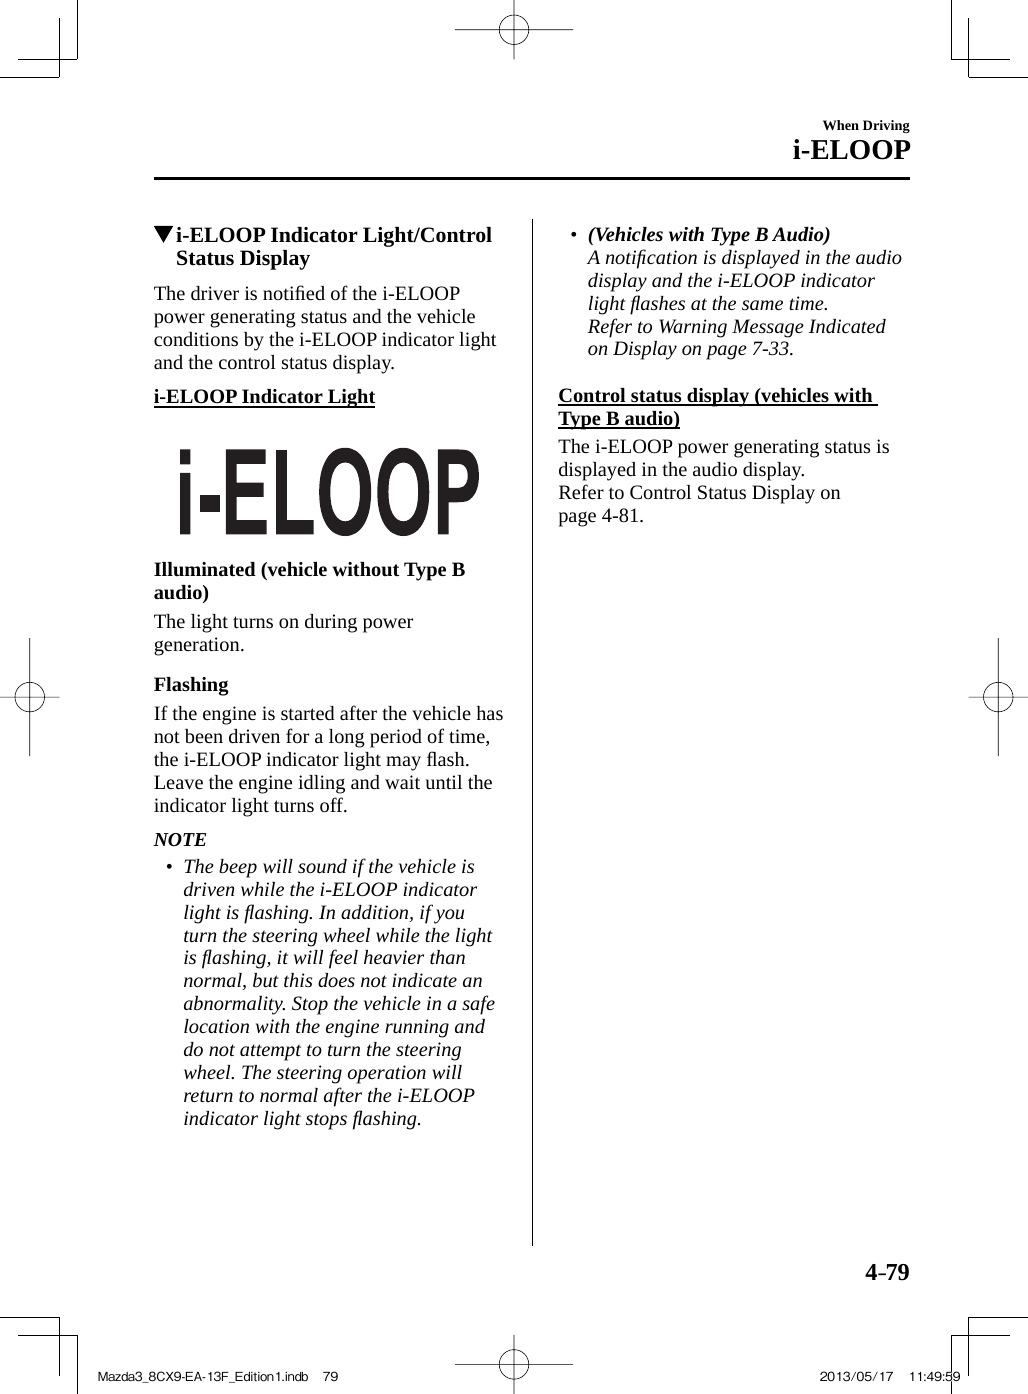 4–79When Drivingi-ELOOP         i-ELOOP Indicator Light/Control Status Display              The  driver  is  notiﬁ ed of the i-ELOOP power generating status and the vehicle conditions by the i-ELOOP indicator light and the control status display.  i-ELOOP  Indicator  Light        Illuminated (vehicle without Type B audio)    The light turns on during power generation.  Flashing    If the engine is started after the vehicle has not been driven for a long period of time, the i-ELOOP indicator light may ﬂ ash. Leave the engine idling and wait until the indicator light turns off.    NOTE•         The beep will sound if the vehicle is driven while the i-ELOOP indicator light is ﬂ ashing. In addition, if you turn the steering wheel while the light is ﬂ ashing, it will feel heavier than normal, but this does not indicate an abnormality. Stop the vehicle in a safe location with the engine running and do not attempt to turn the steering wheel. The steering operation will return to normal after the i-ELOOP indicator light stops ﬂ ashing.•          (Vehicles with Type B Audio)    A notiﬁ cation is displayed in the audio display and the i-ELOOP indicator light ﬂ ashes at the same time.    Refer to Warning Message Indicated on Display on page  7-33 .       Control status display (vehicles with Type B audio)    The i-ELOOP power generating status is displayed in the audio display.  Refer to Control Status Display on page  4-81 .Mazda3_8CX9-EA-13F_Edition1.indb   79Mazda3_8CX9-EA-13F_Edition1.indb   79 2013/05/17   11:49:592013/05/17   11:49:59